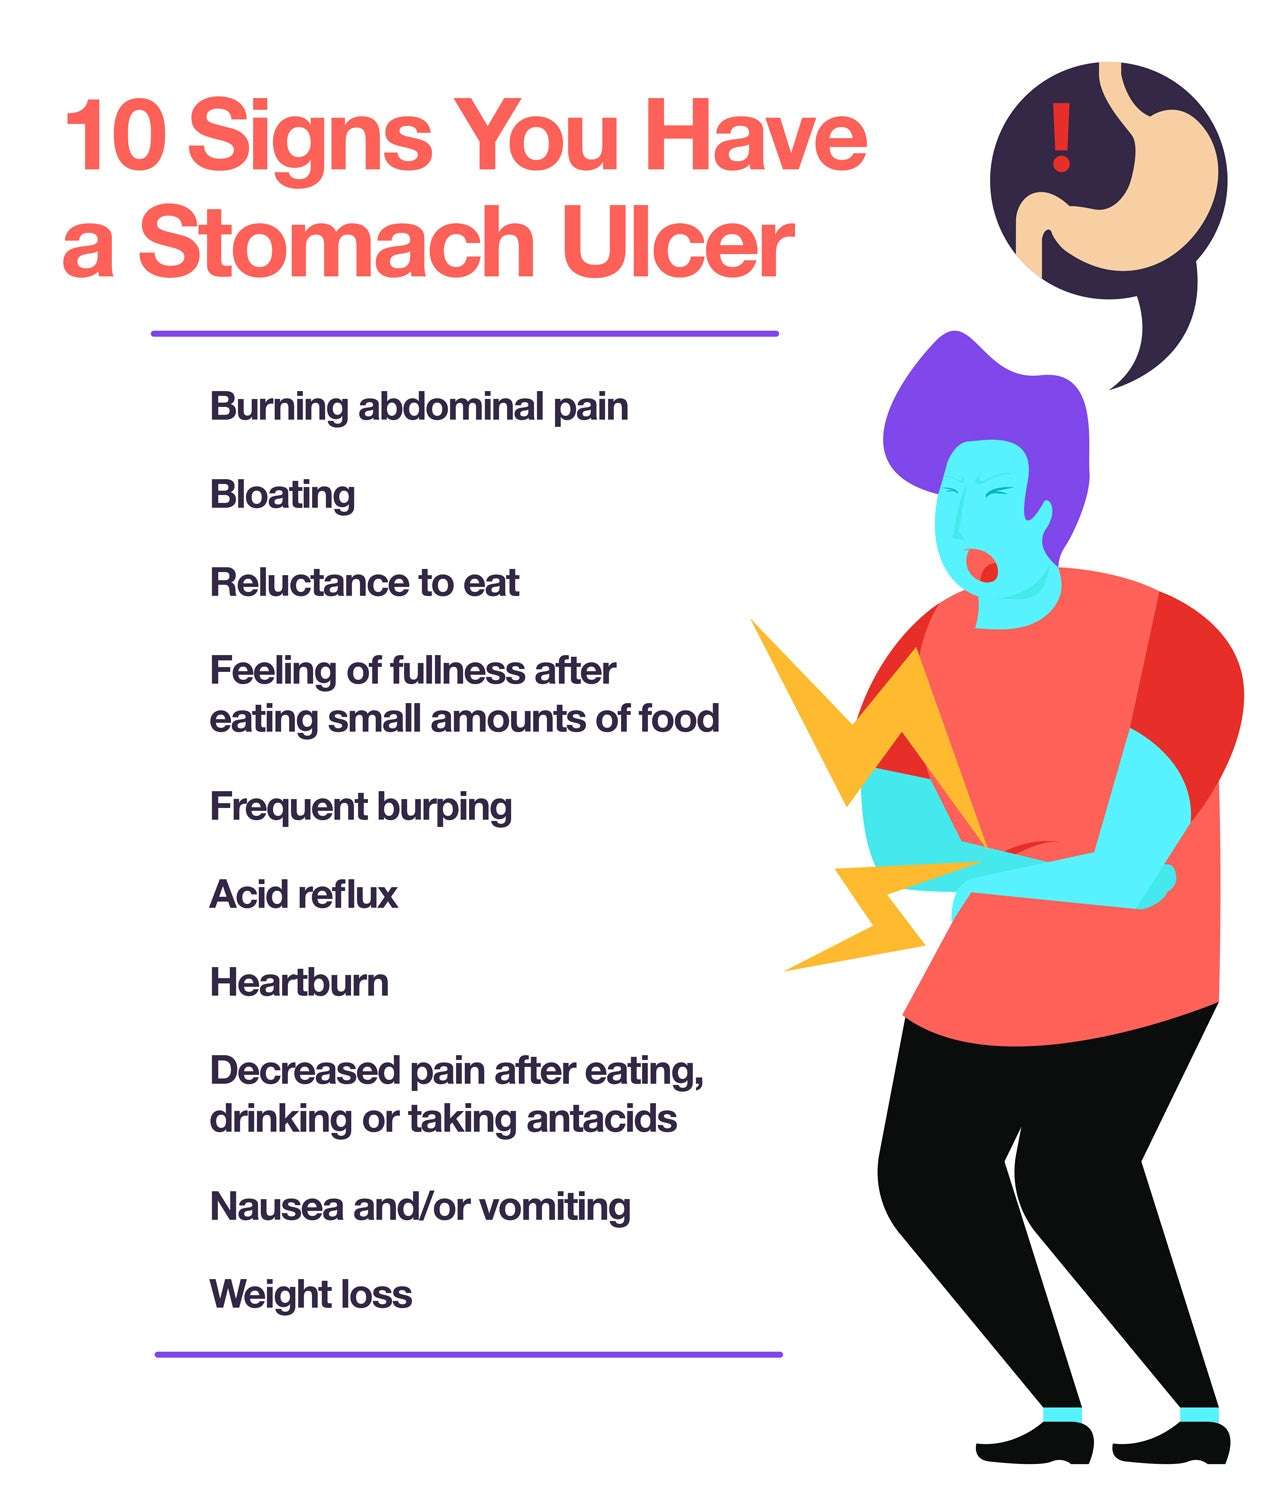 Why Take These 10 Stomach Ulcer Symptoms Seriously